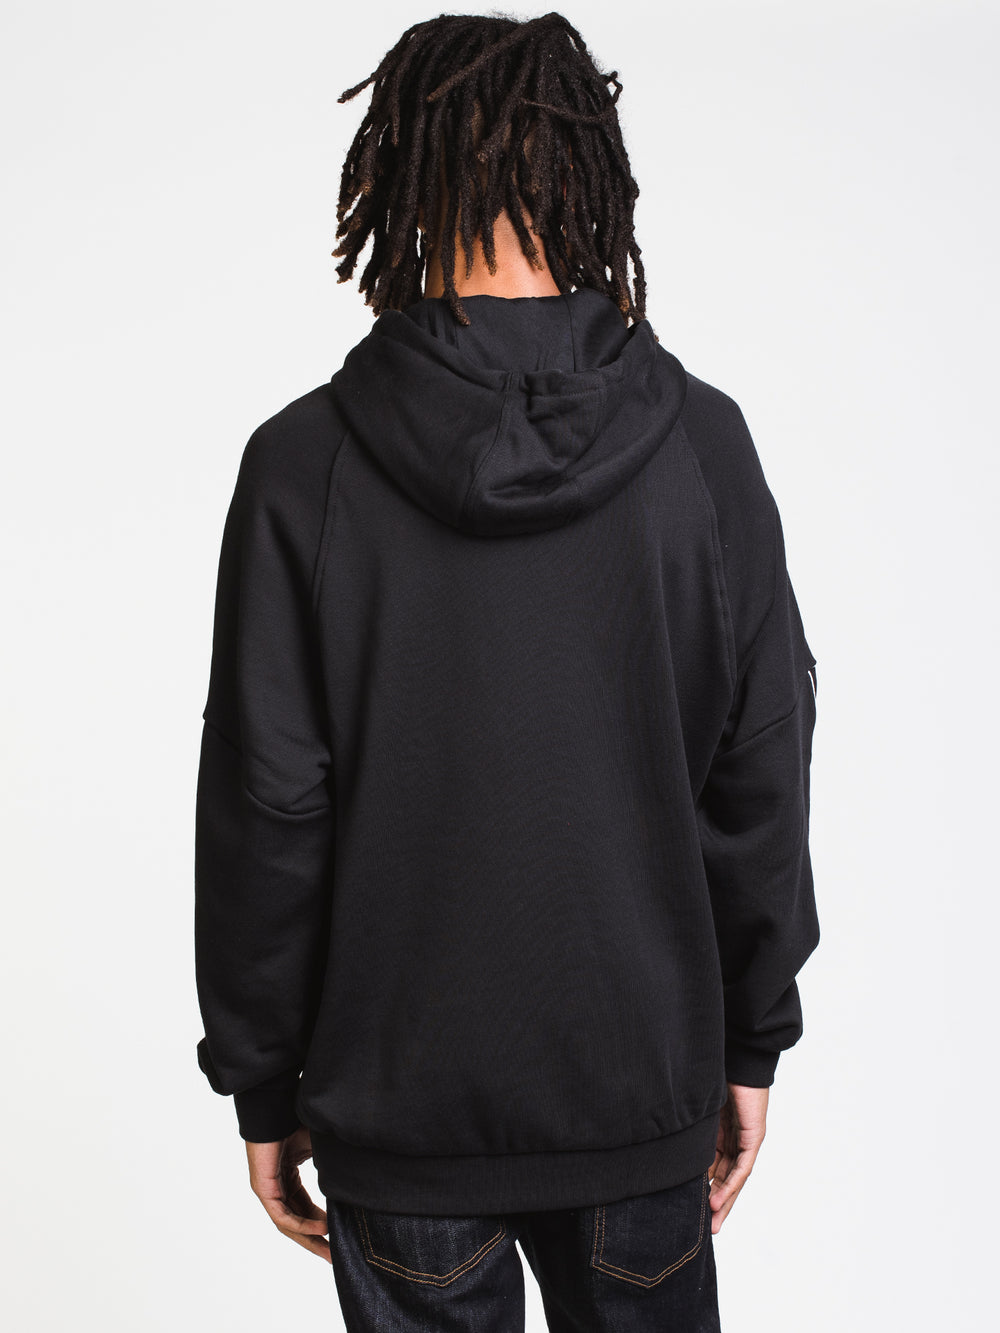 ADIDAS BIG TREFOIL OUT PULLOVER HOODIE - CLEARANCE